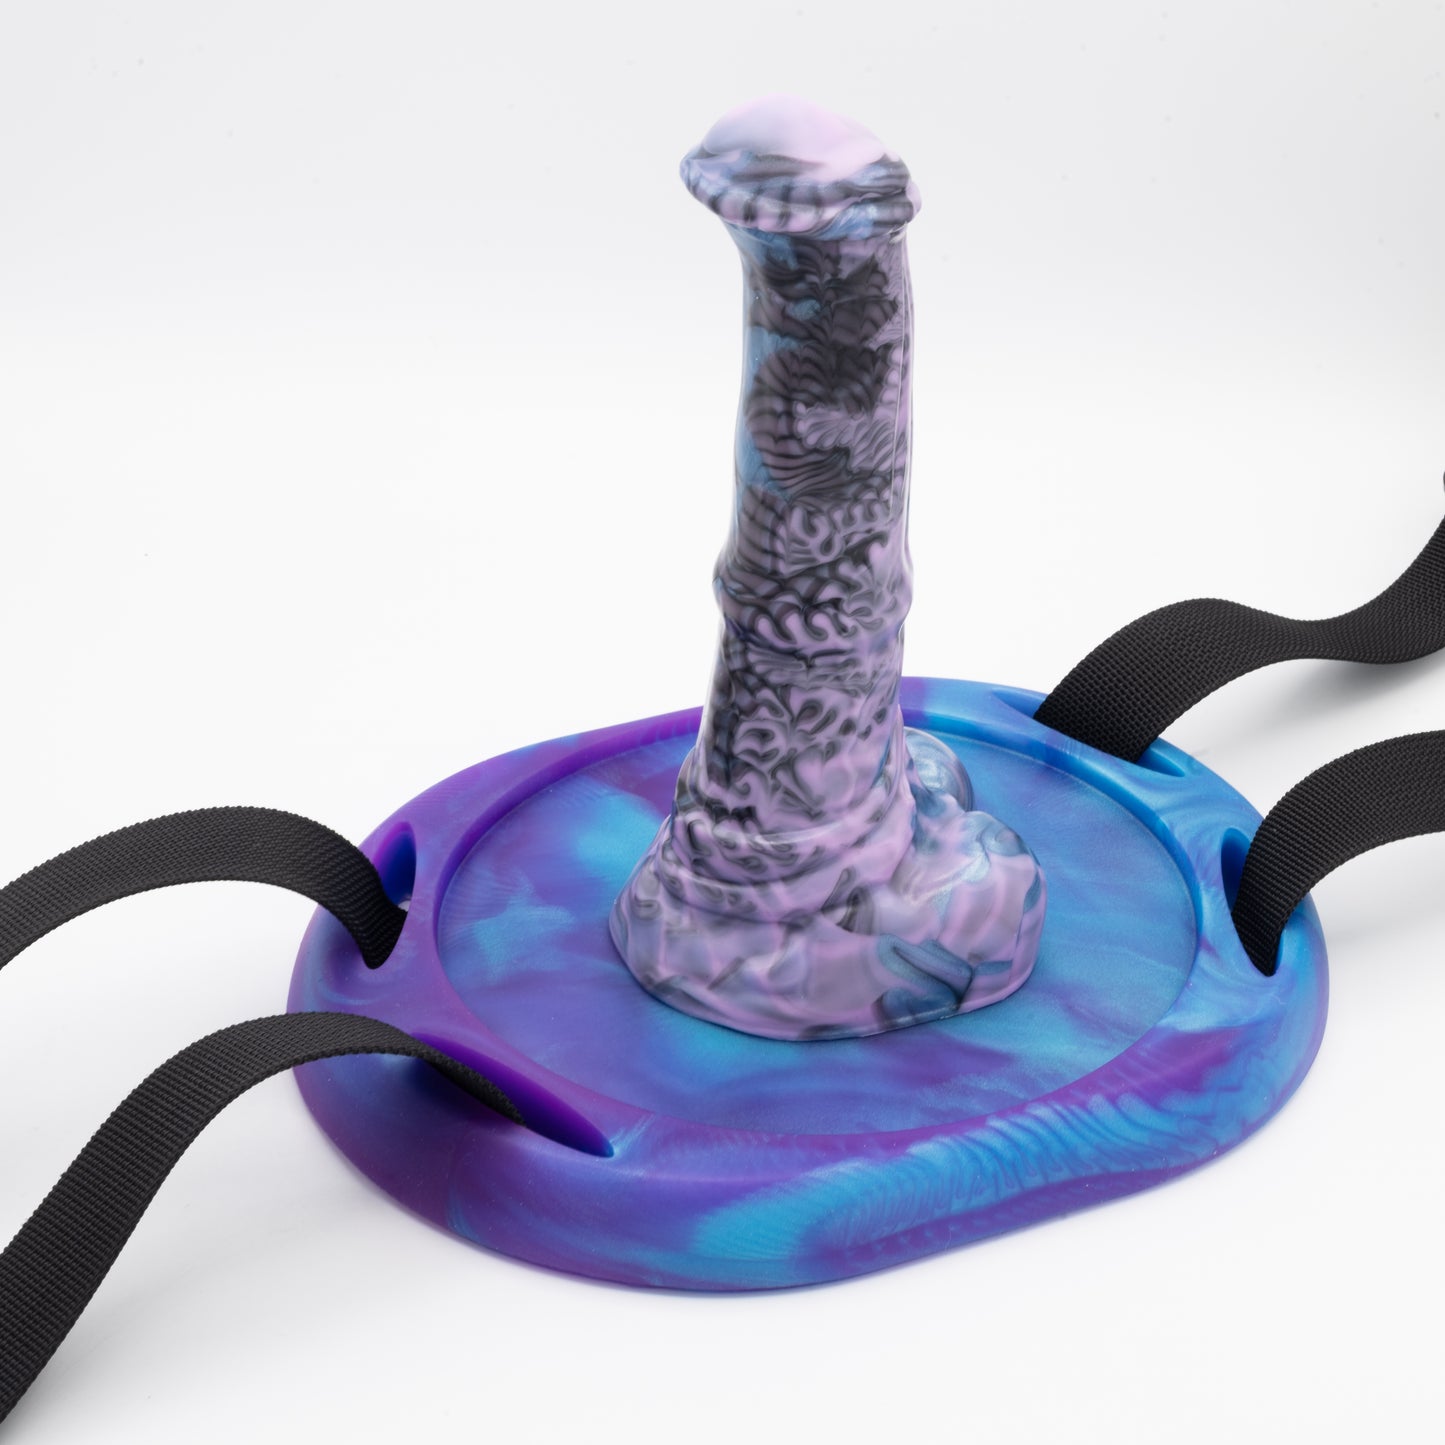 One Night Stand Mount - The Original Platinum Silicone Sex Toy Mount